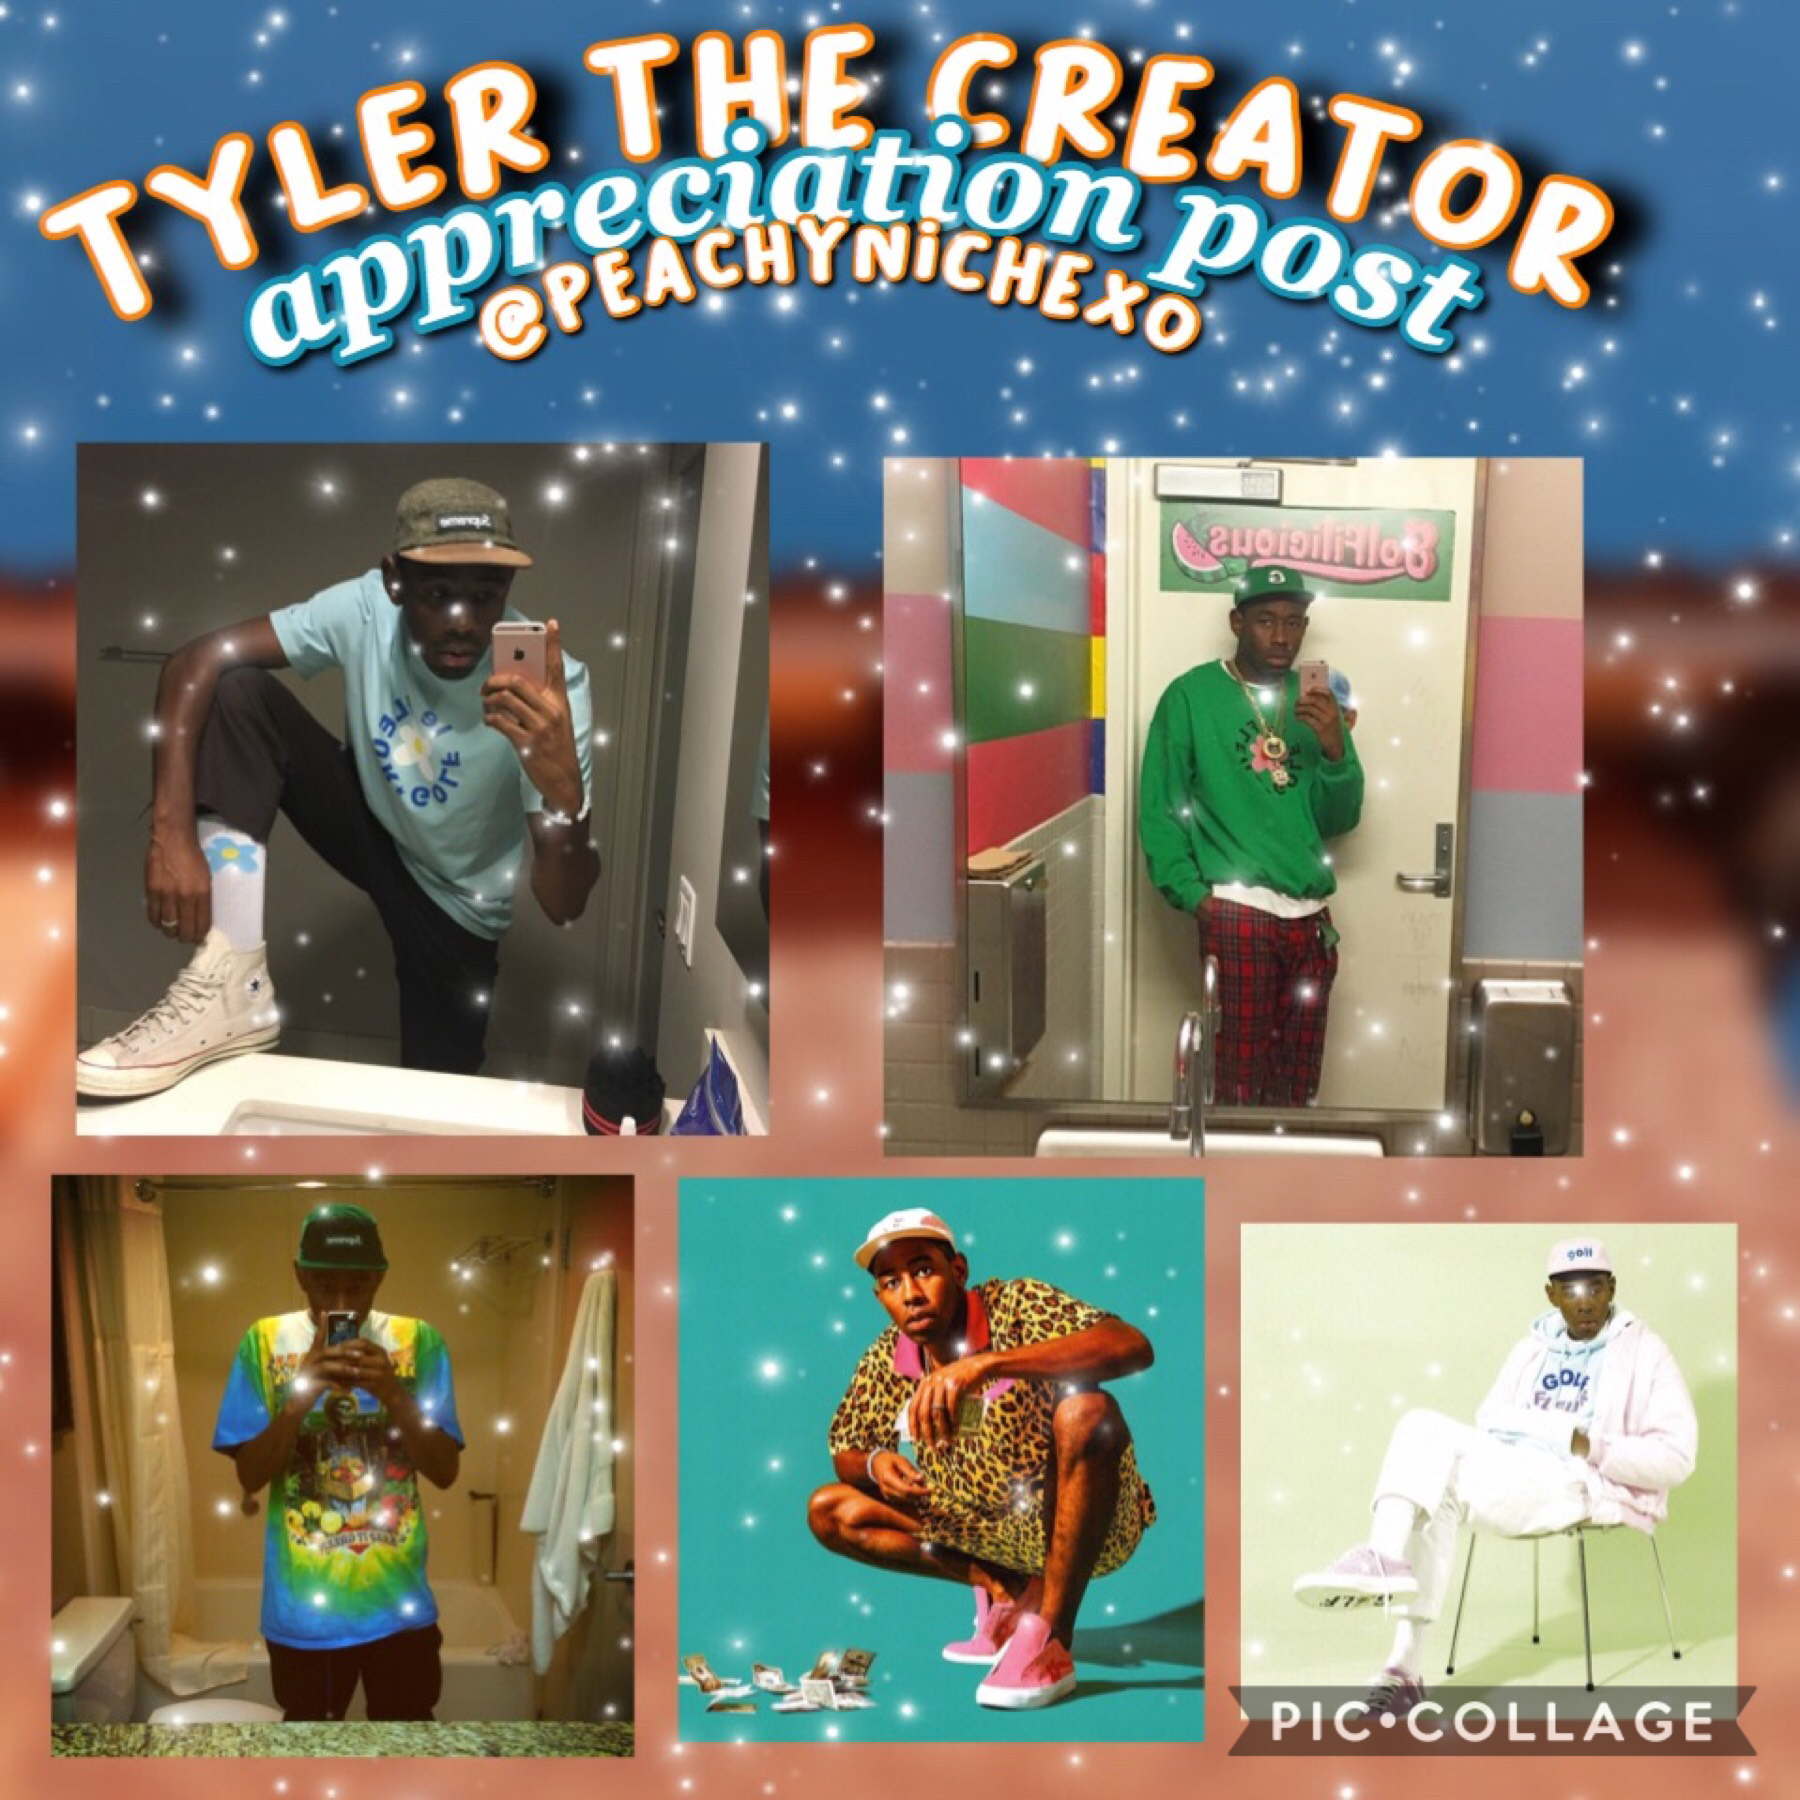 ♡Tap




peachyniche::❃
Hey Loves!! So I love this post because it has Tyler The Creator.Goodbye my loves🧡💙

—date:7/21/18
—time:6:32pm
—qotd:favorite song of Tyler 
::❃
